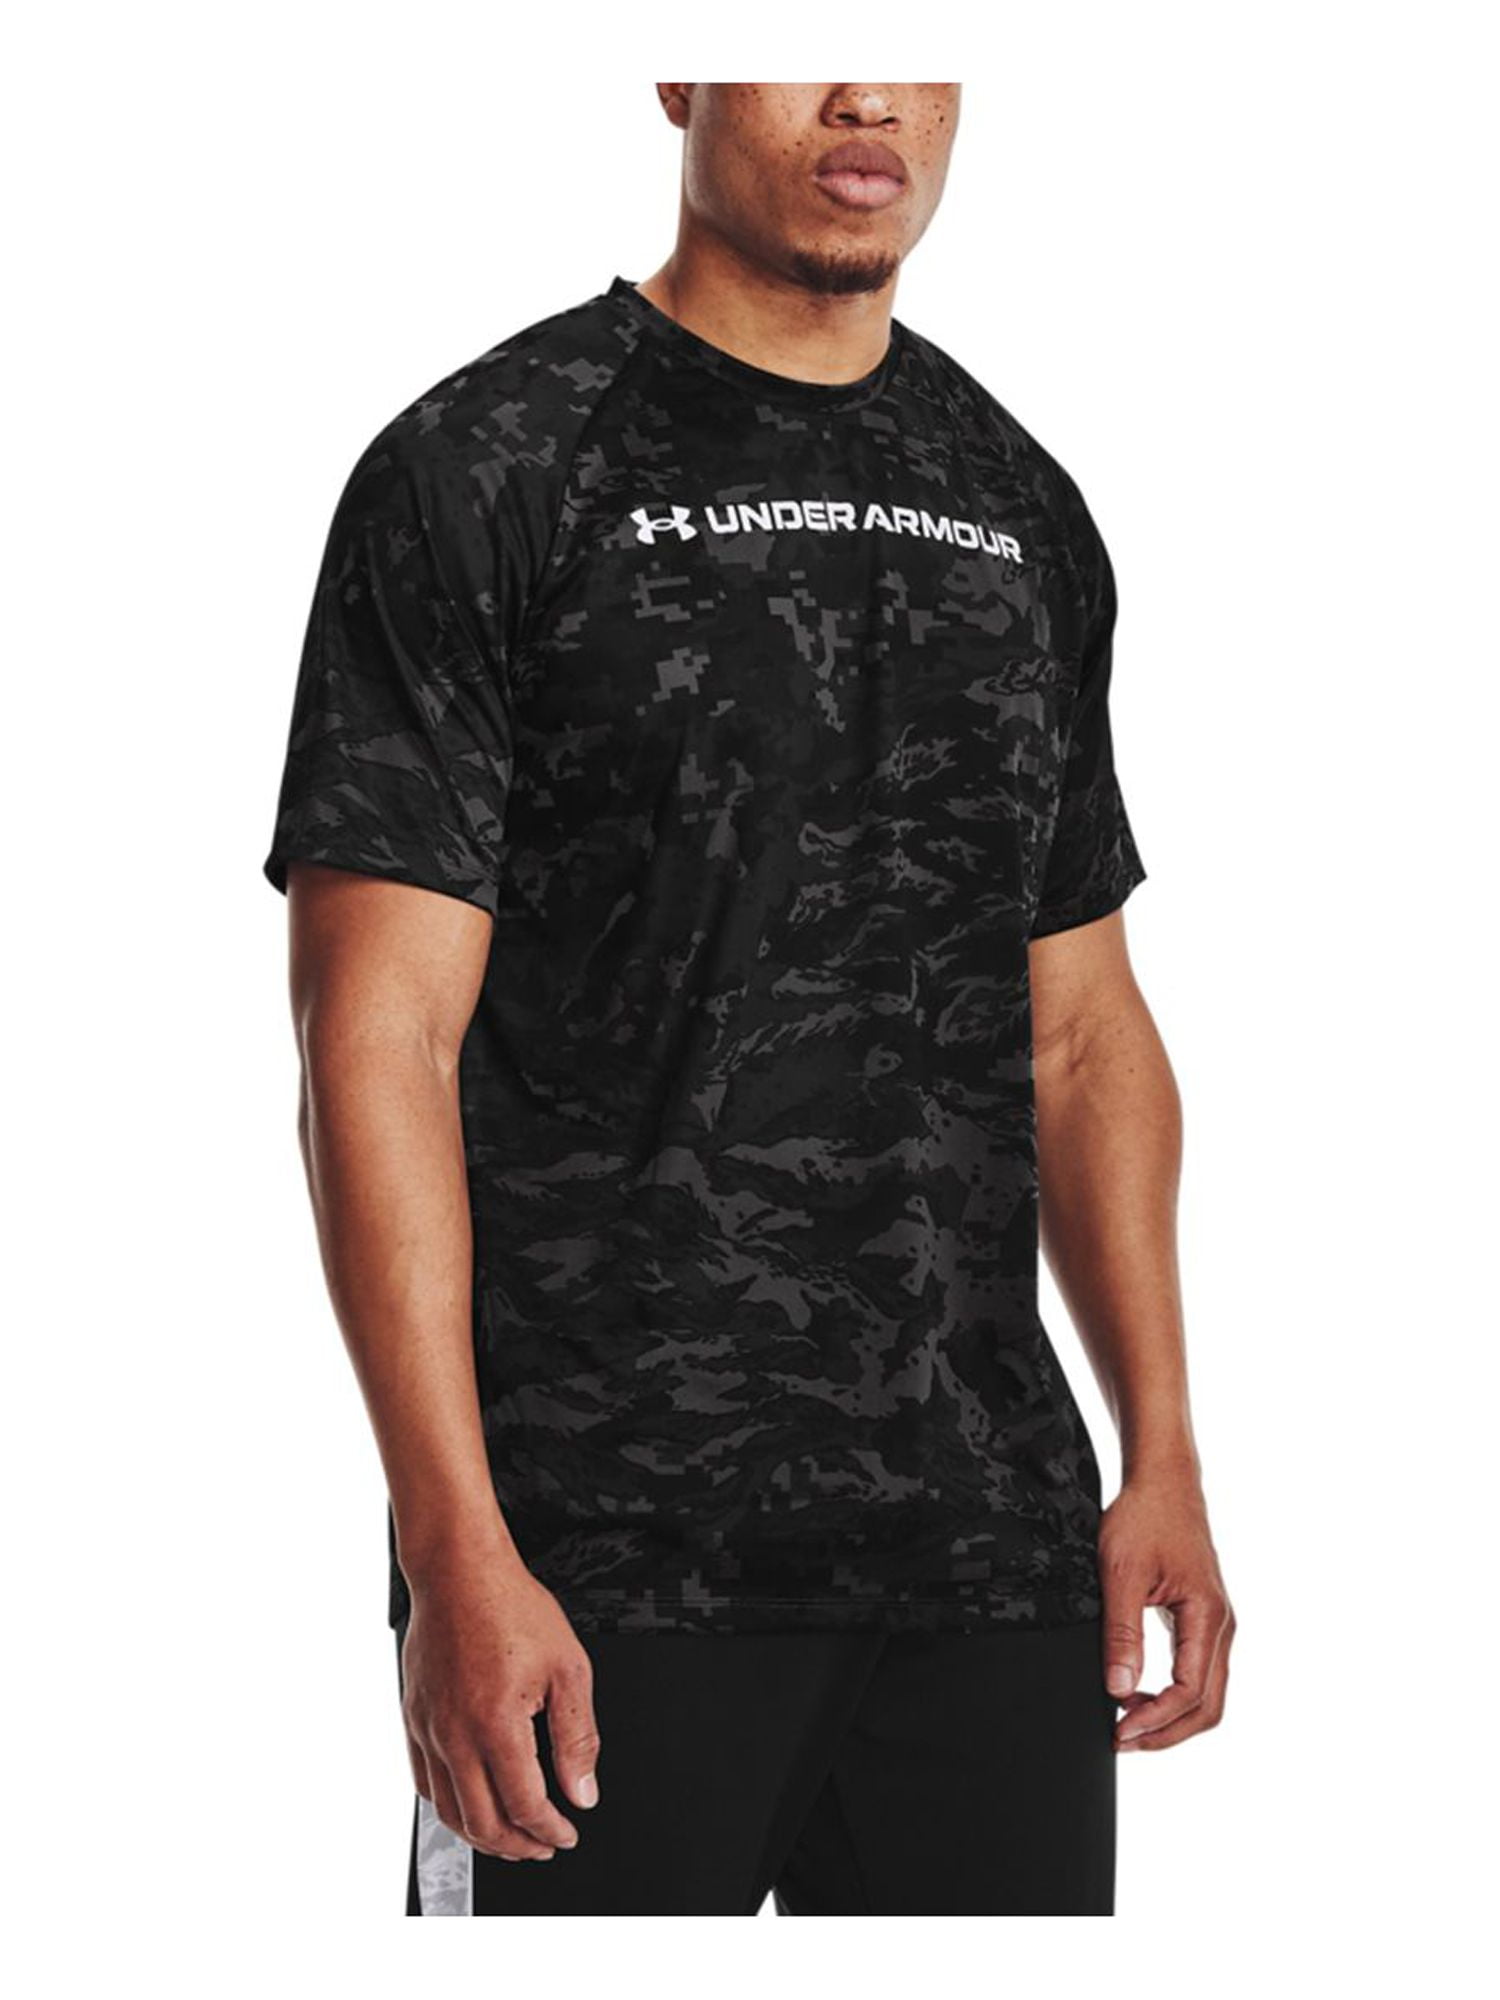 UNDER ARMOUR Mens Training Gray Camouflage Classic Fit Stretch T-Shirt L,  Women 